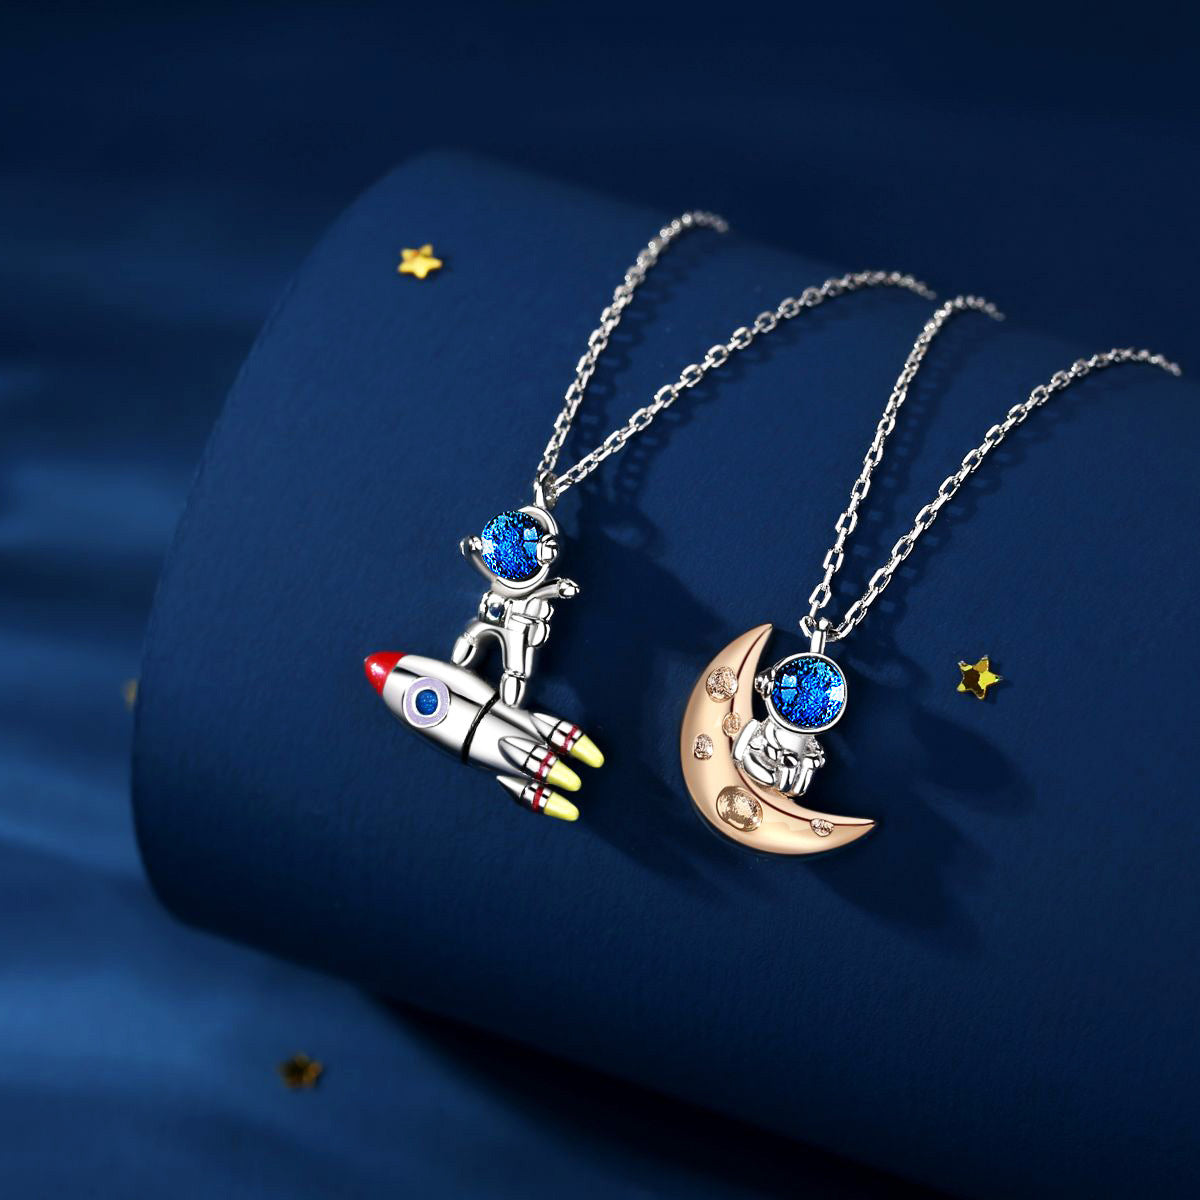 Magnetic Couple Necklace, Astronaut Matching Necklaces for Couples